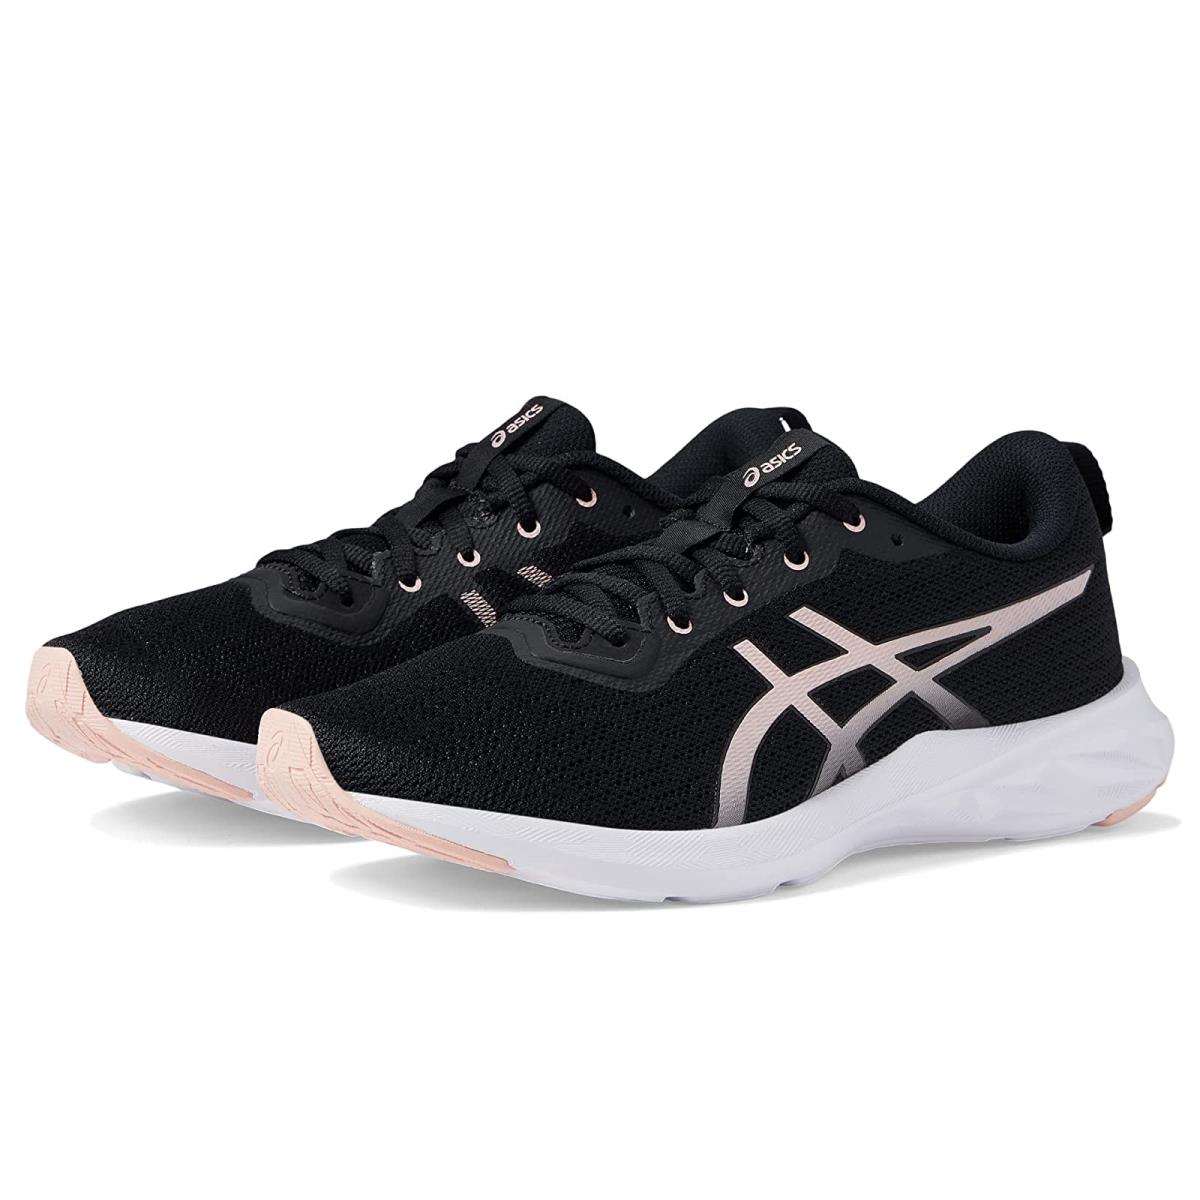 Woman`s Sneakers Athletic Shoes Asics Versablast 2 Black/Frosted Rose